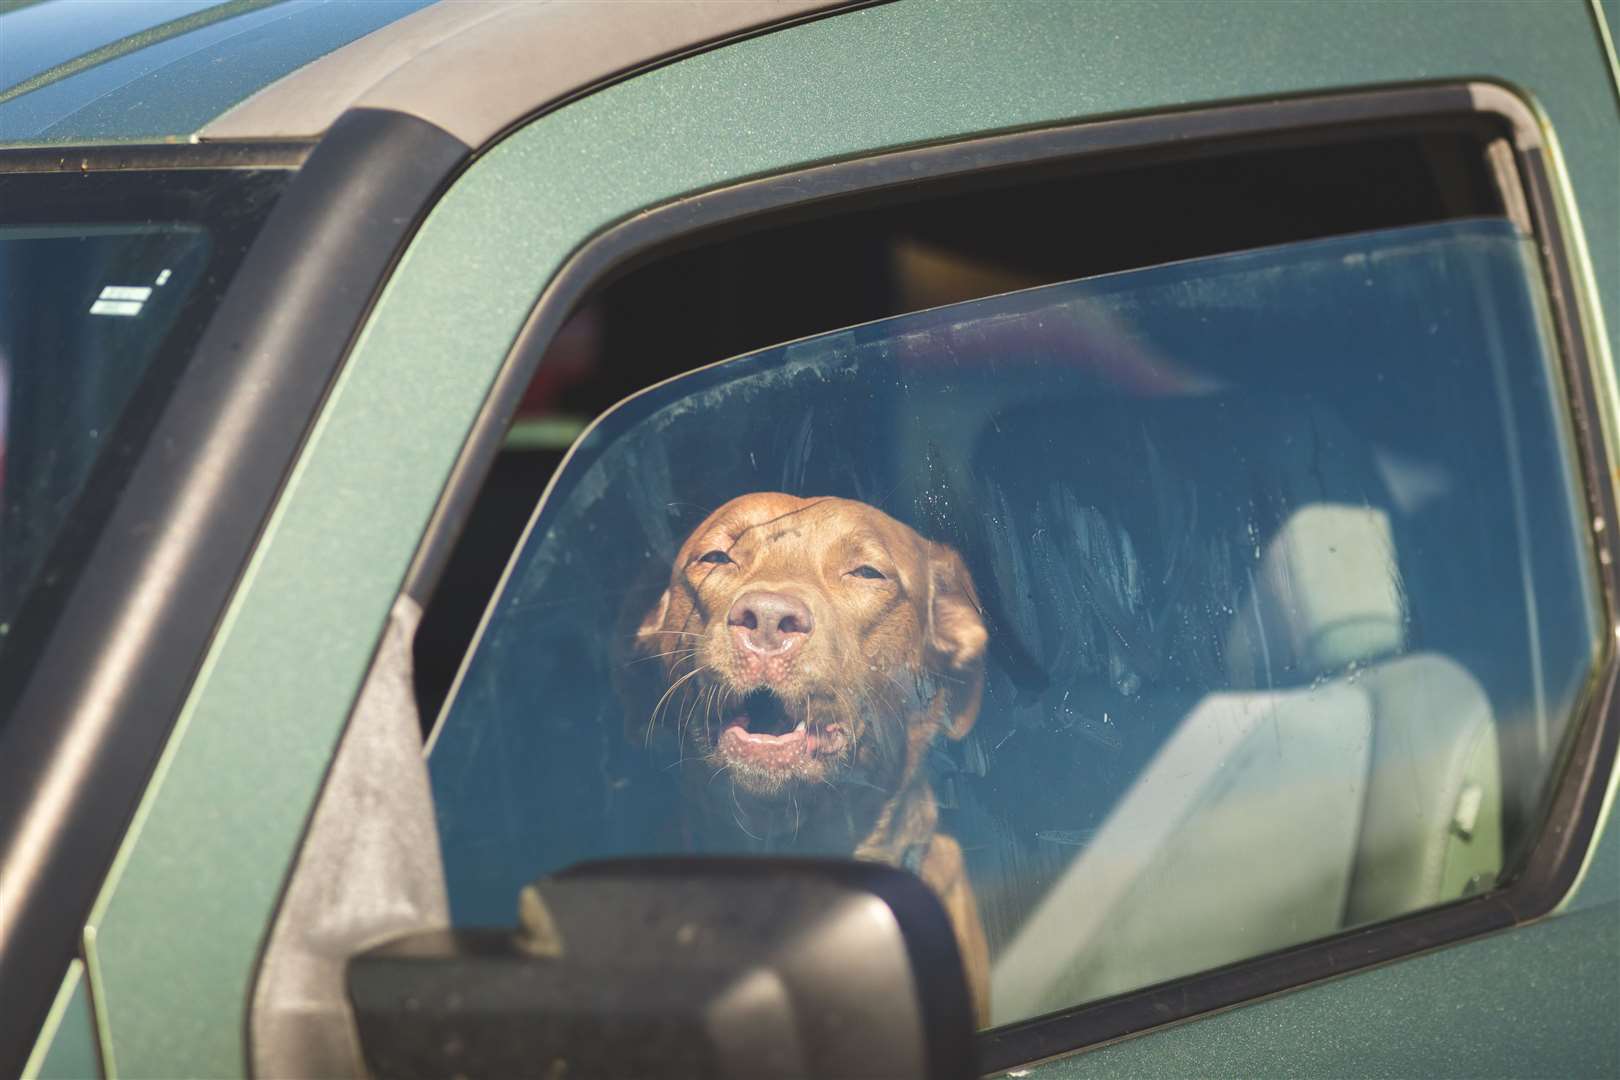 If you've opened a window for your pet when travelling ensure the space doesn't allow them to squeeze their head through